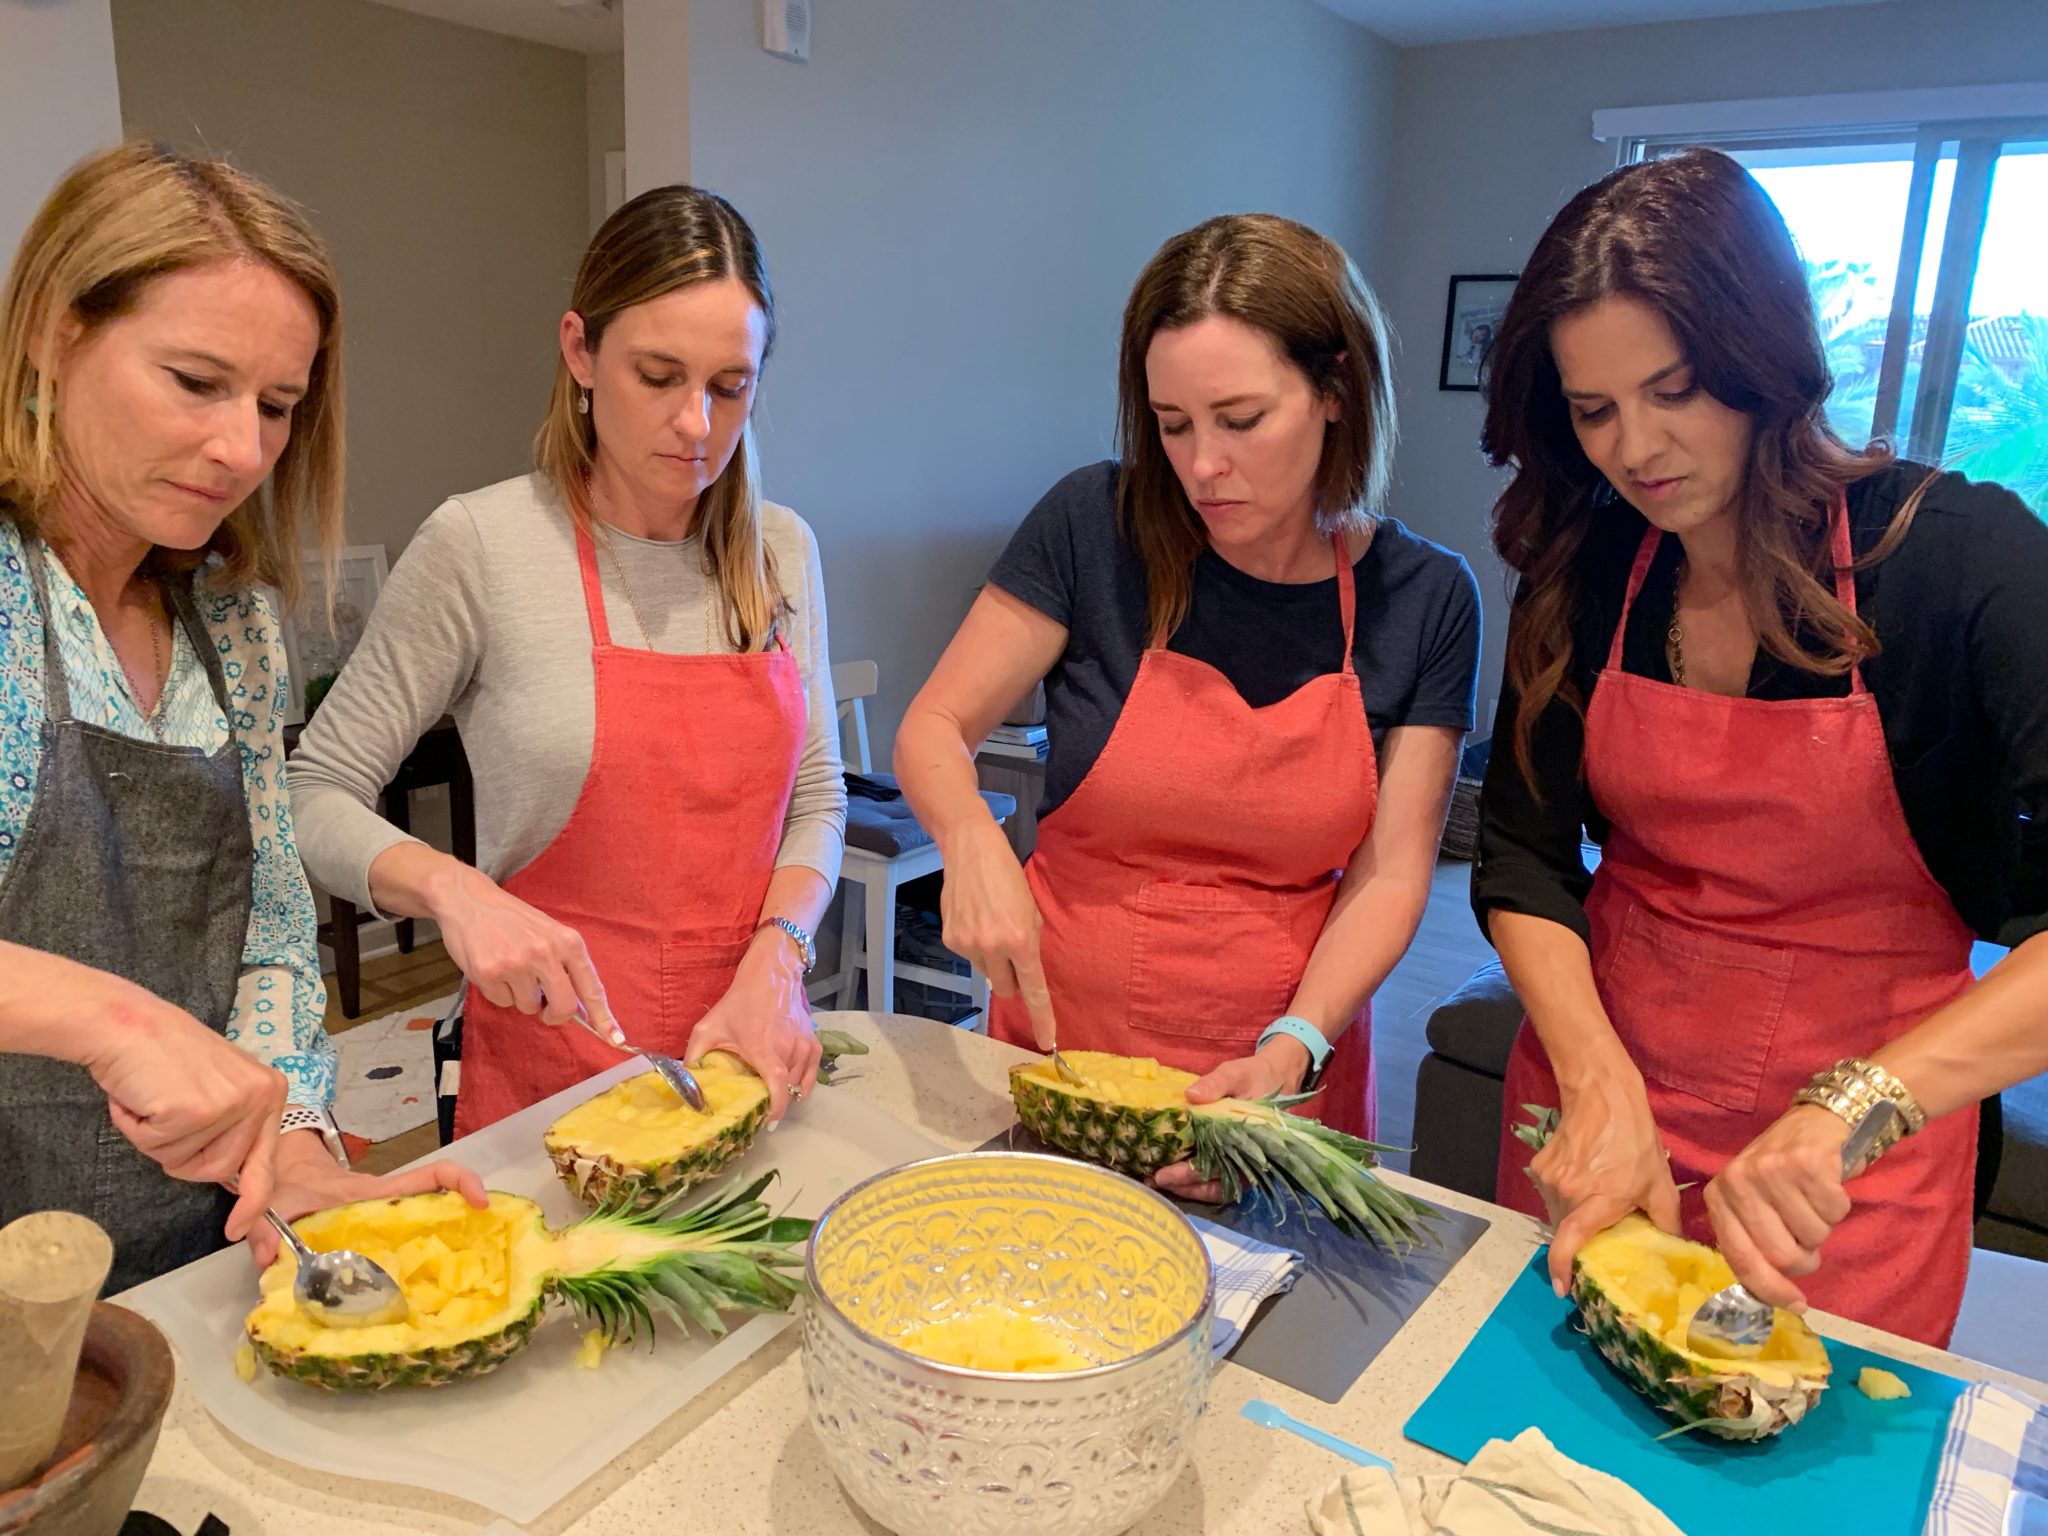 cooking classes san diego